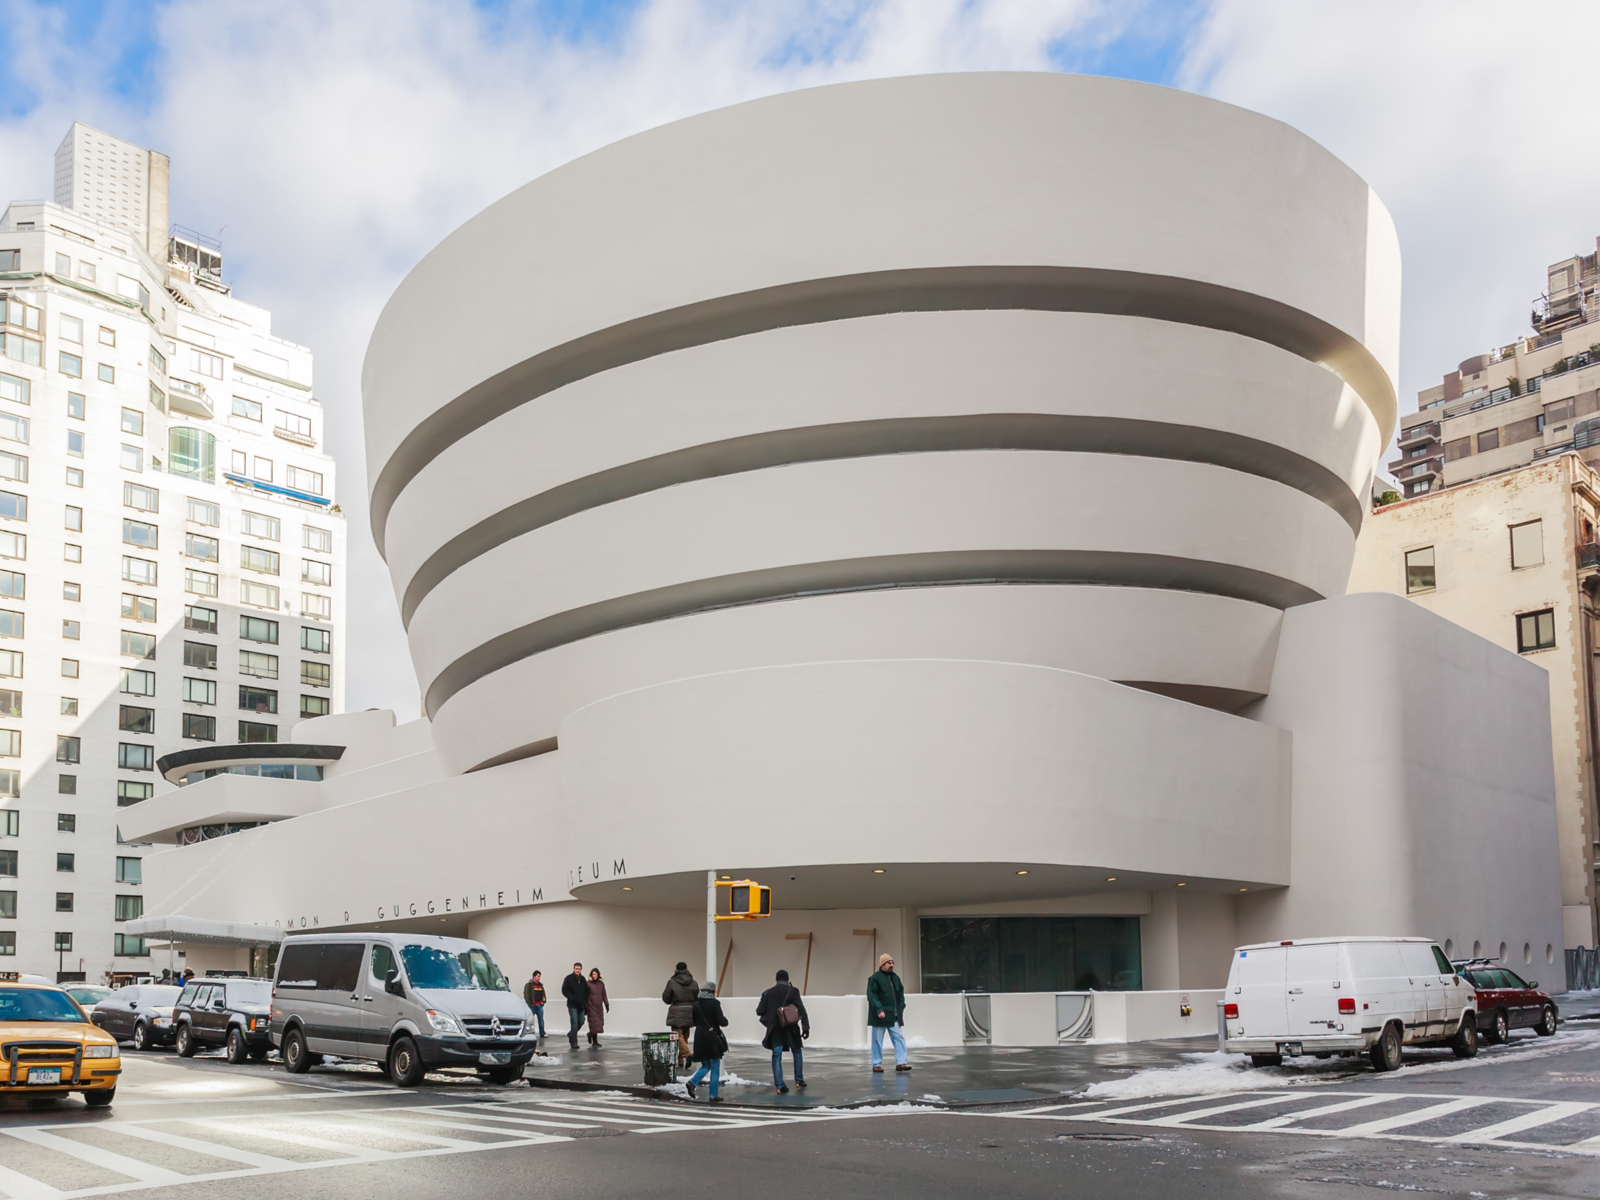 The Guggenheim museum, one of the best things to do in New York City, pictured from the street